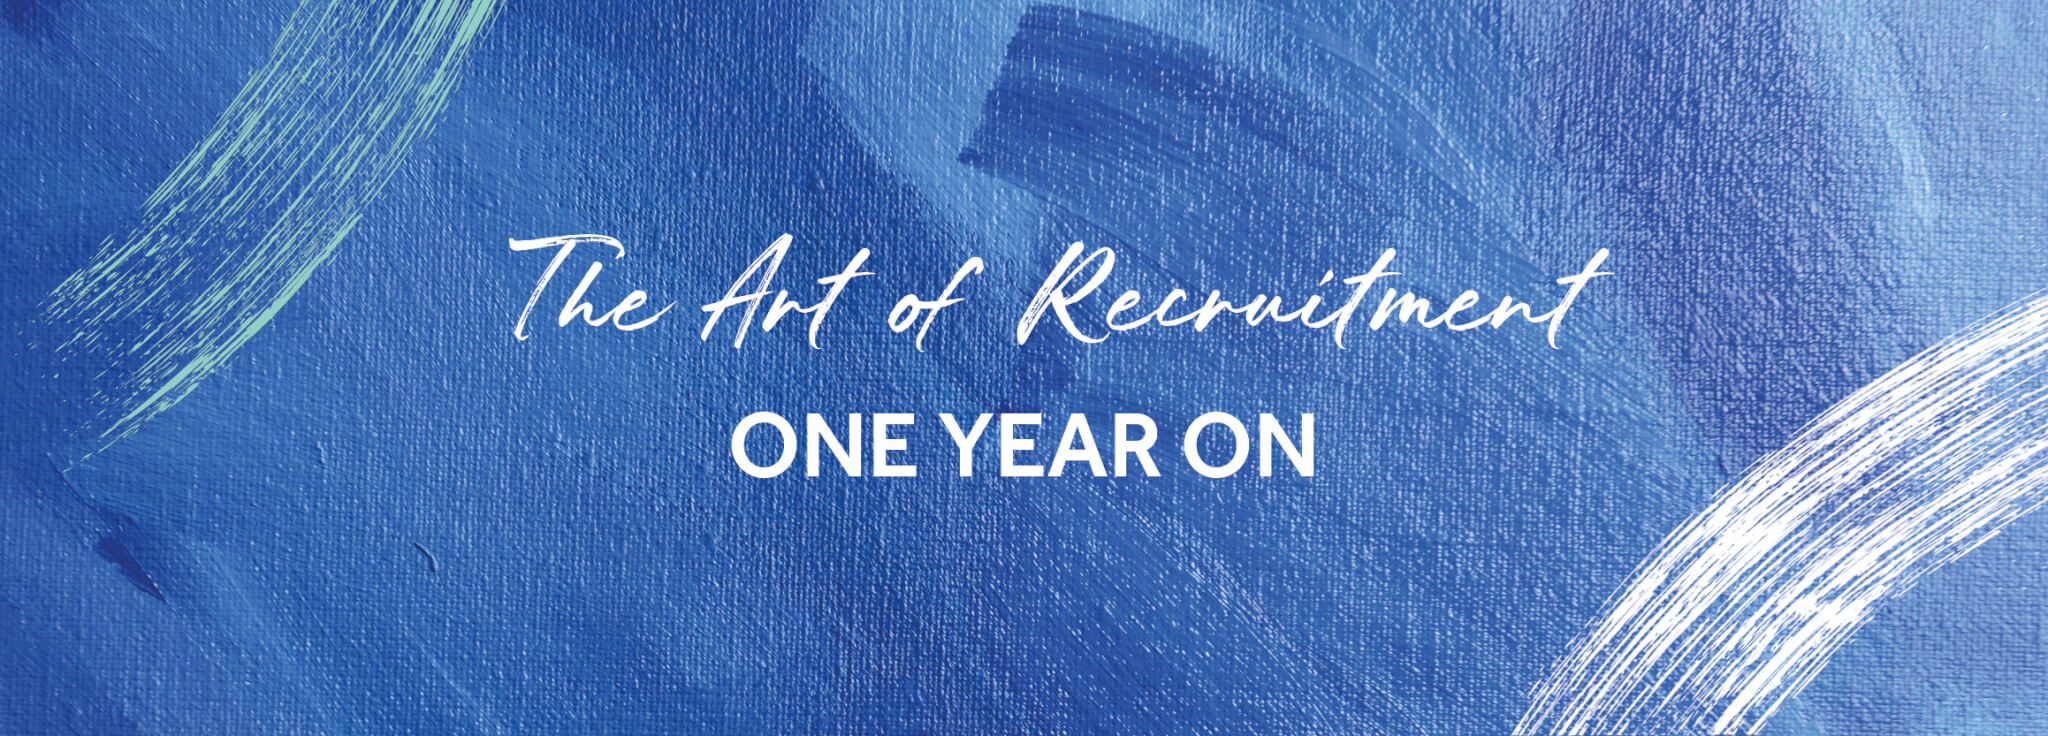 The Art of Recruitment: One year on